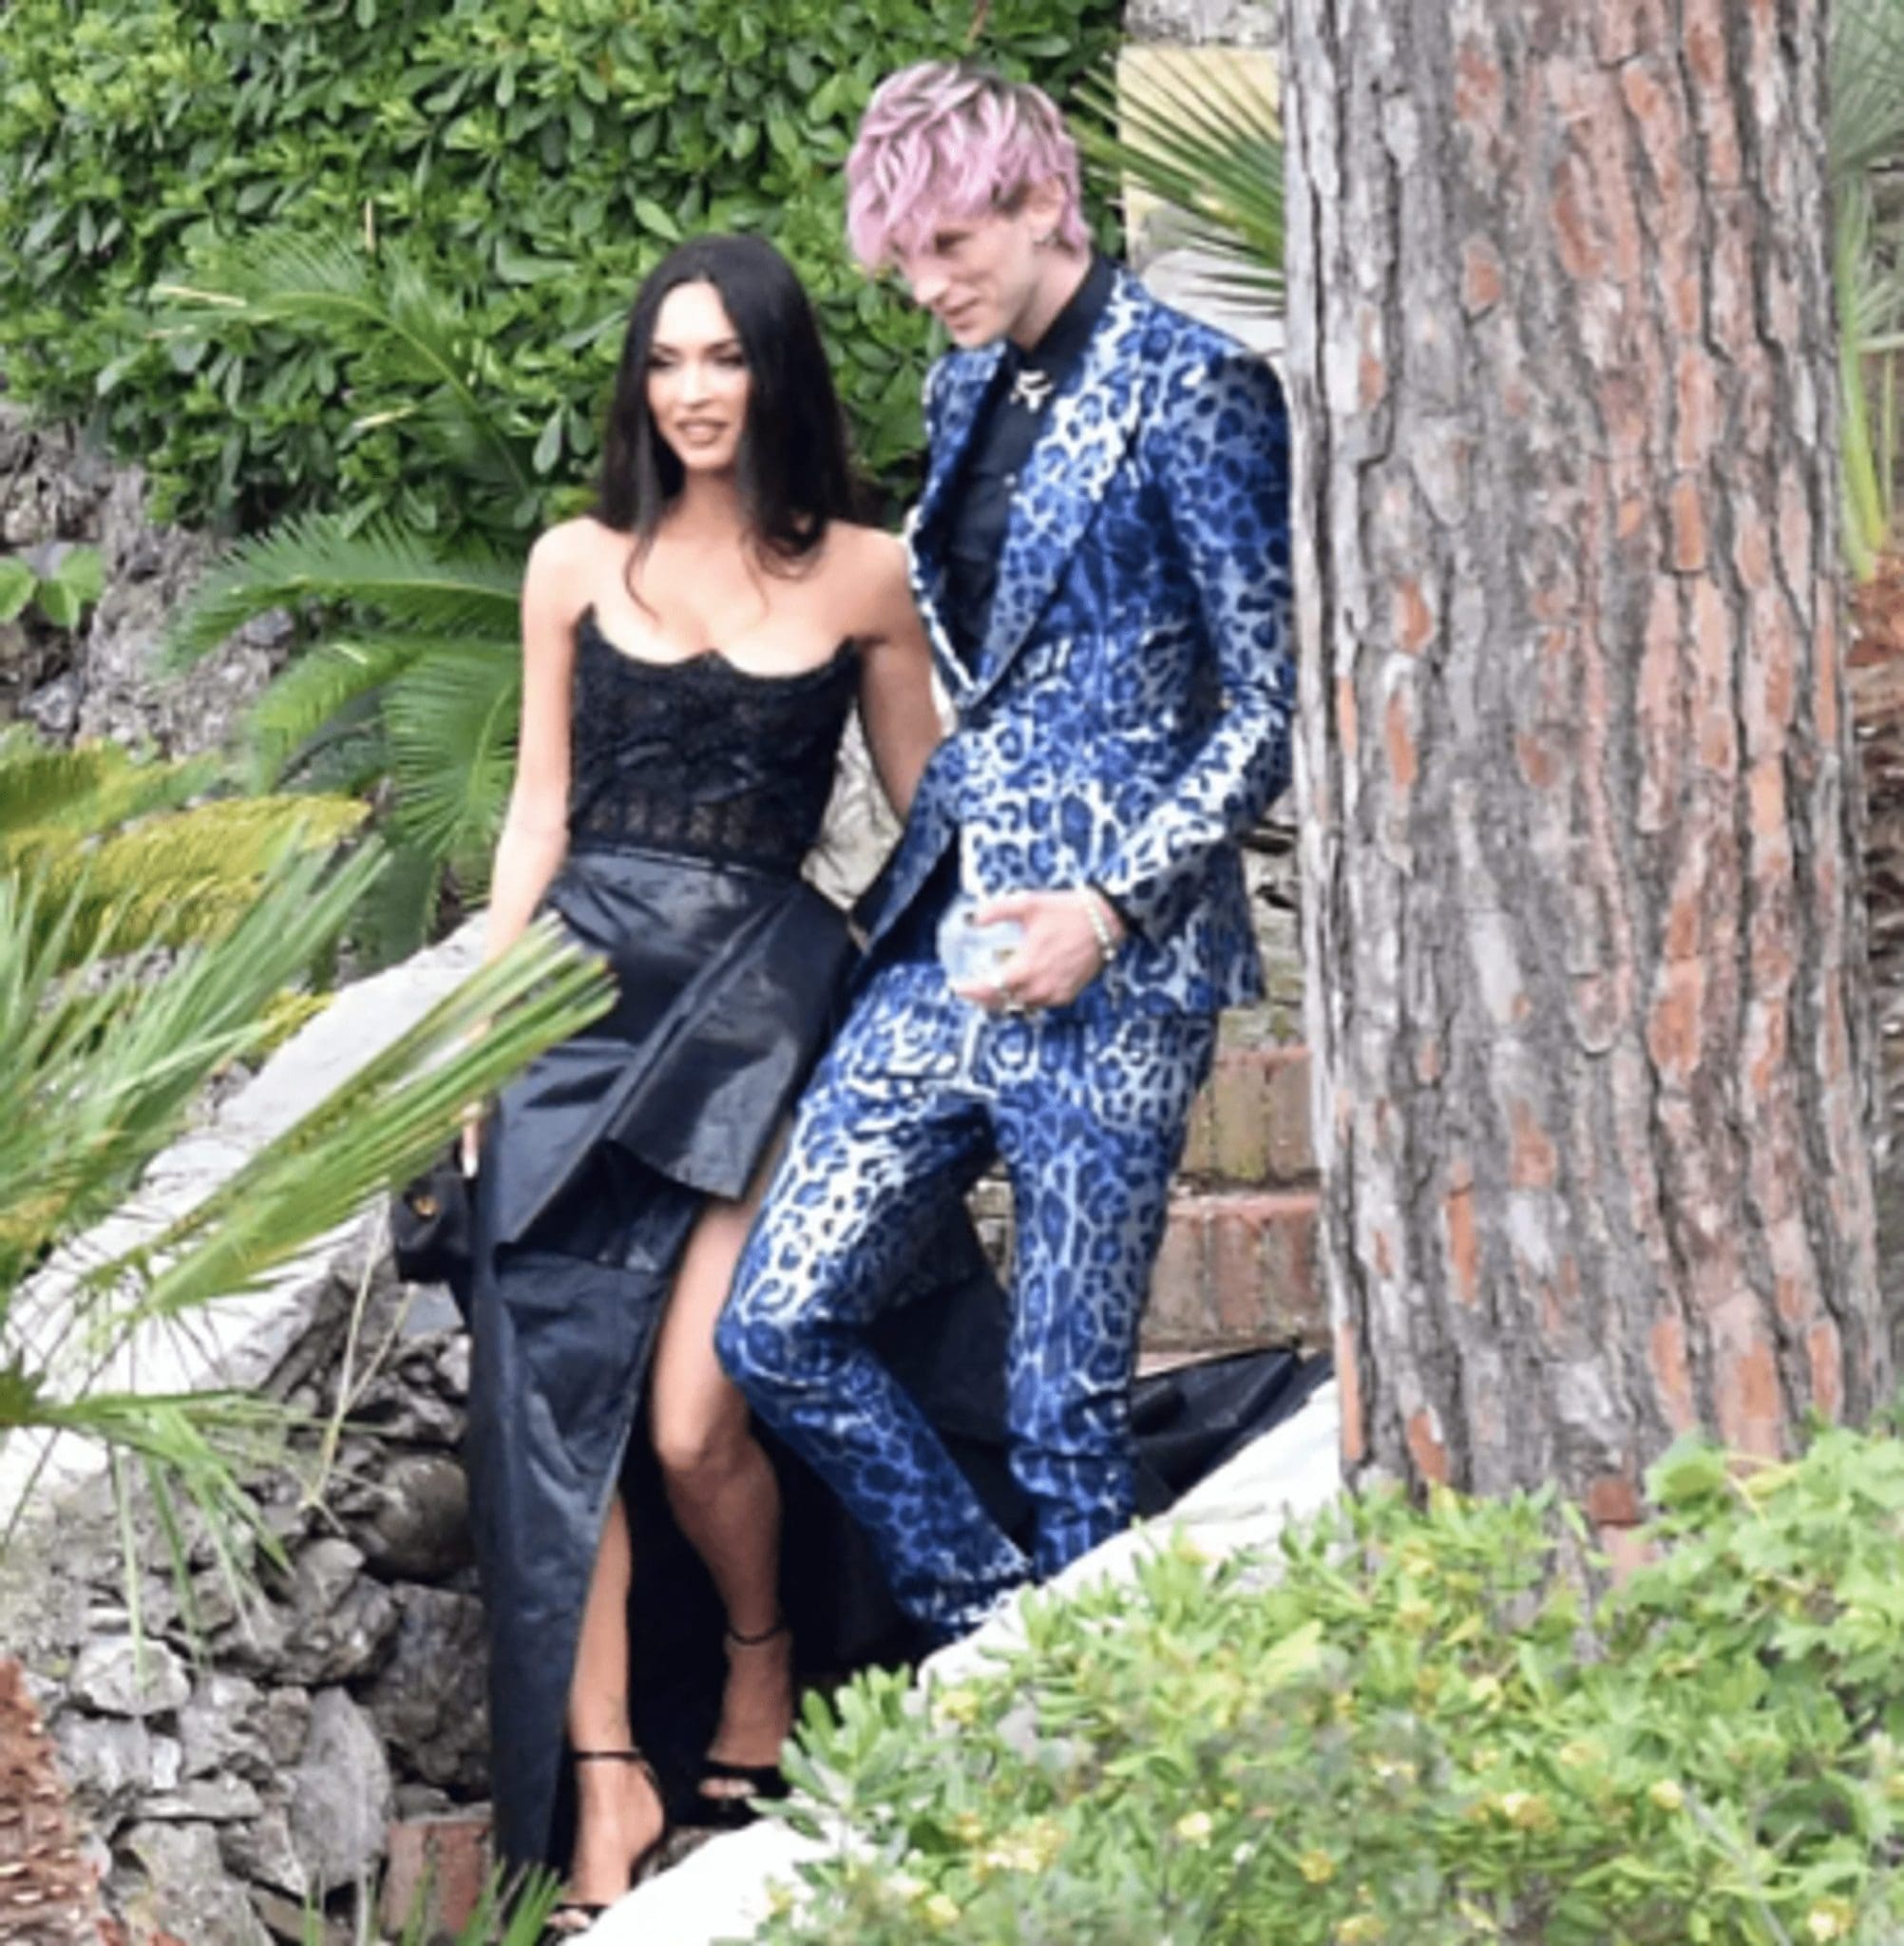 Megan Fox posted a very touching photo in which her future husband Machine Gun Kelly is courting her in a special way